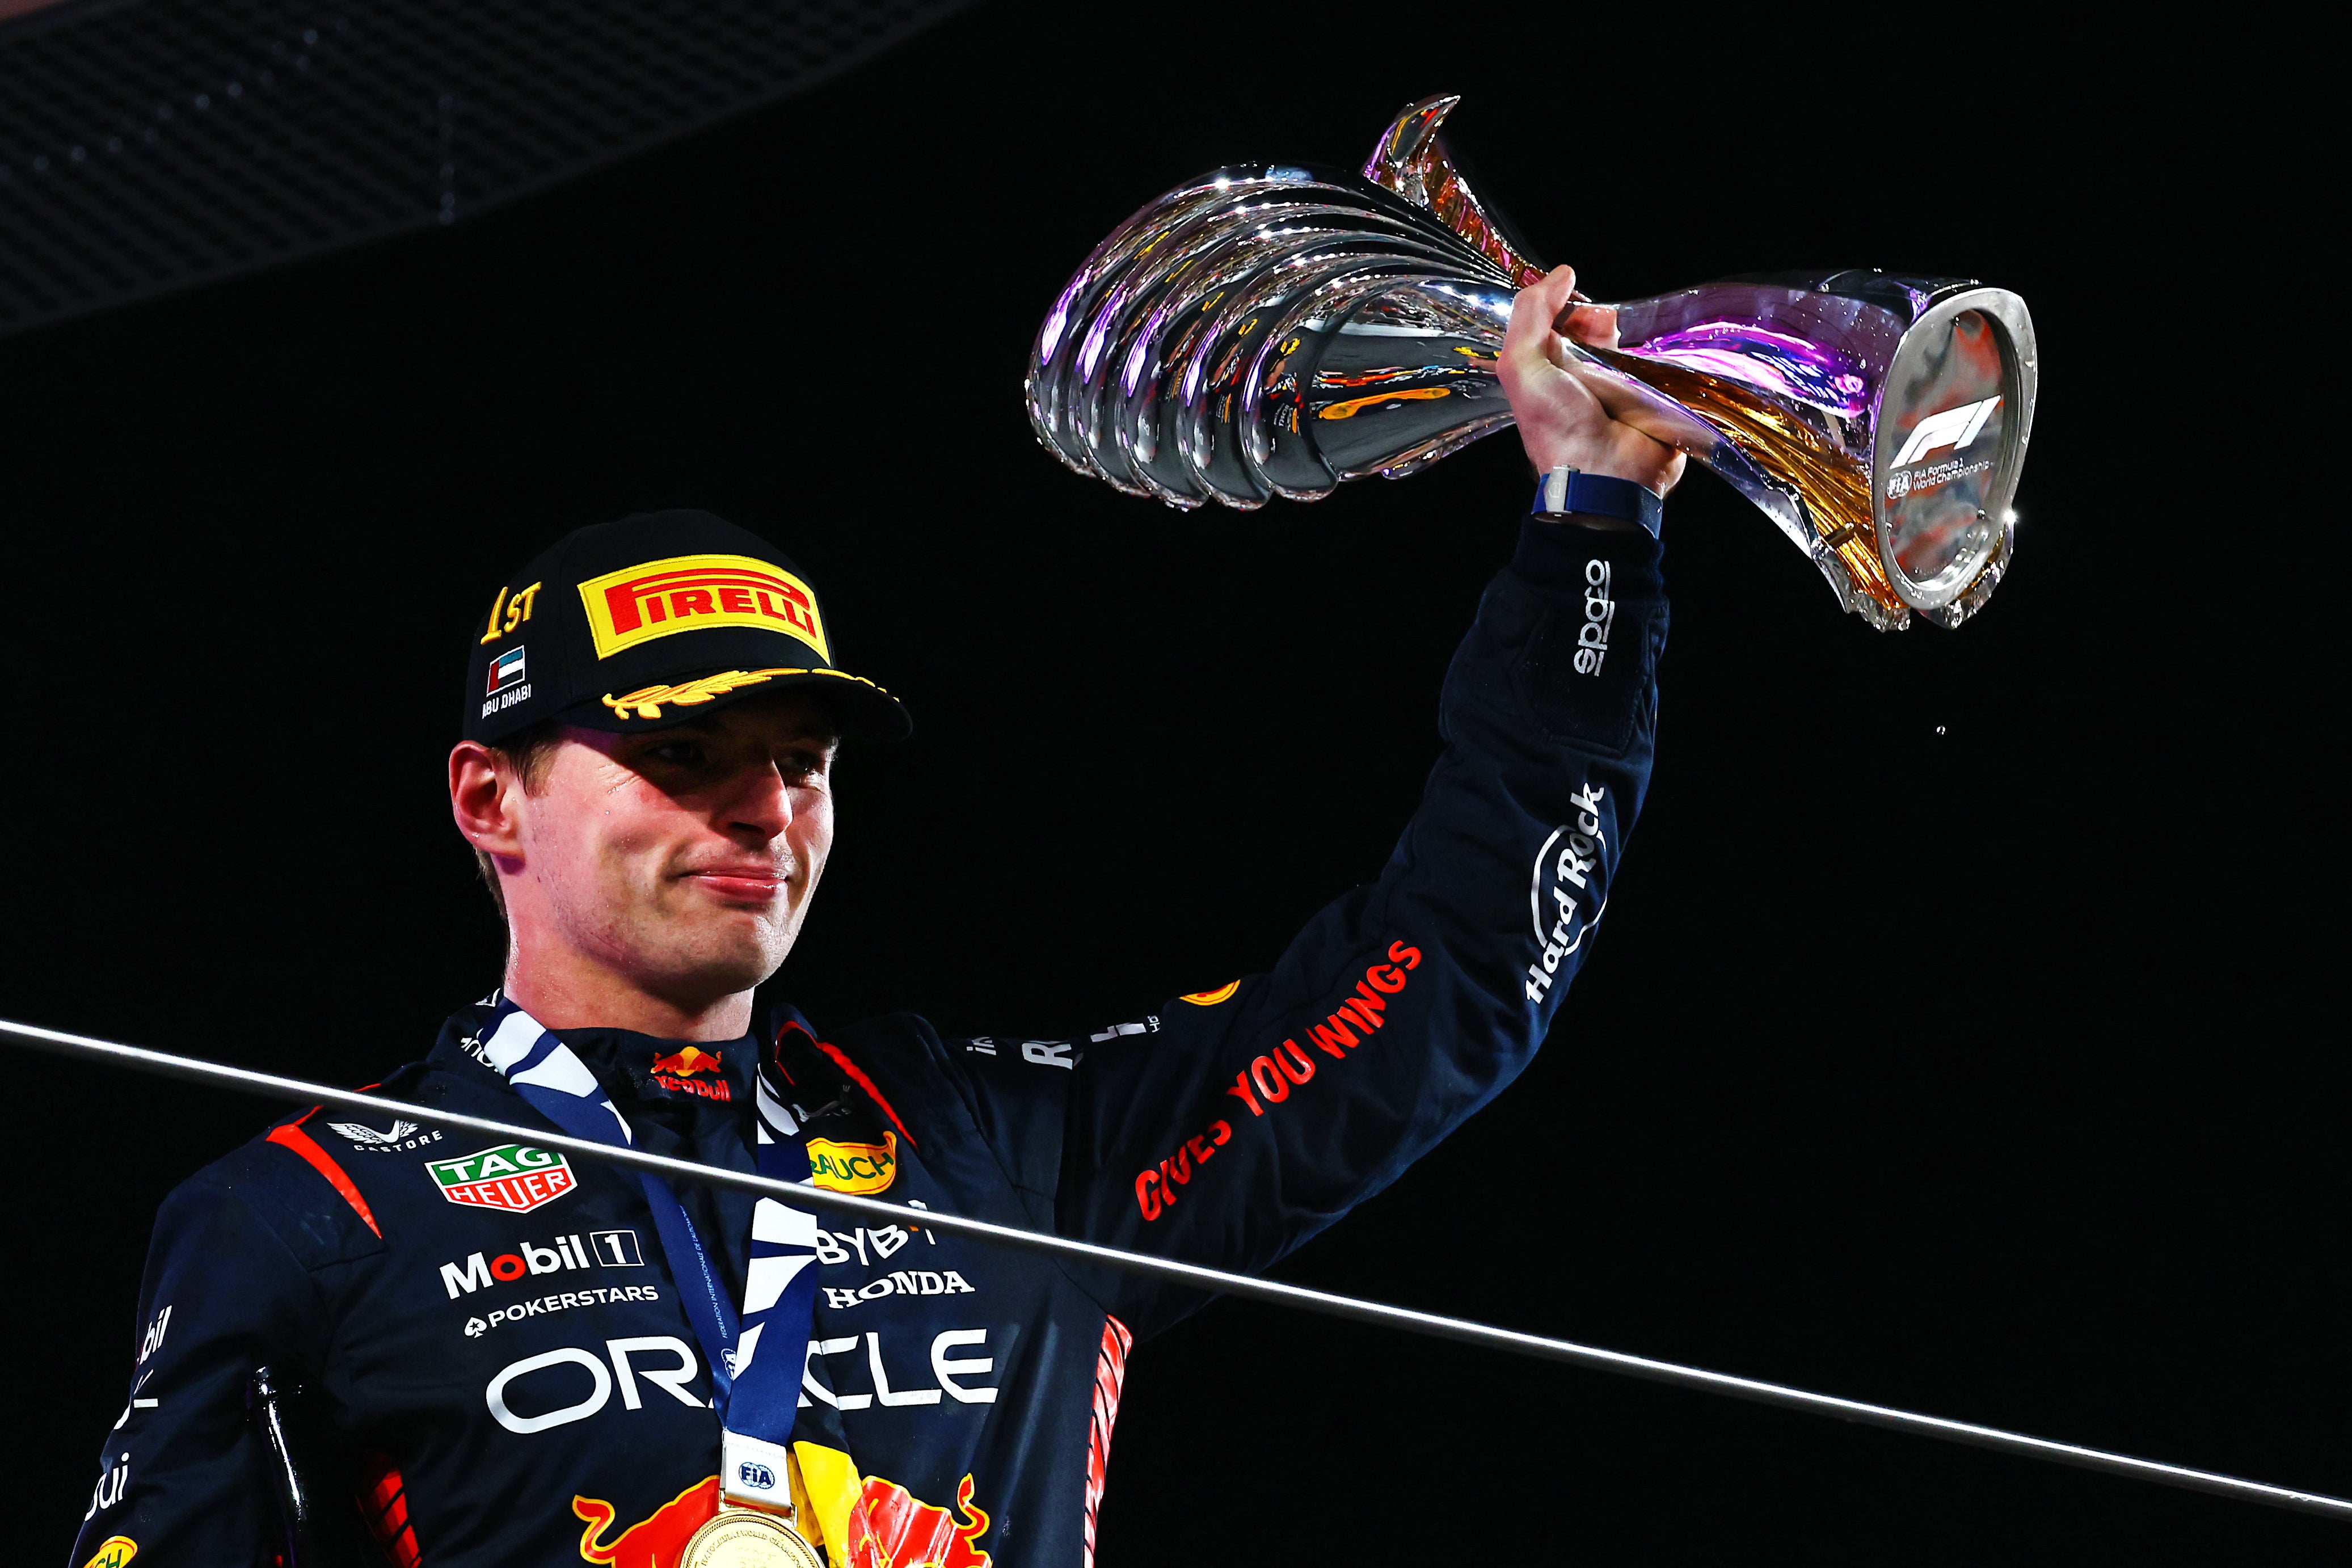 Max Verstappen won a record-breaking 19 races out of 22 this year